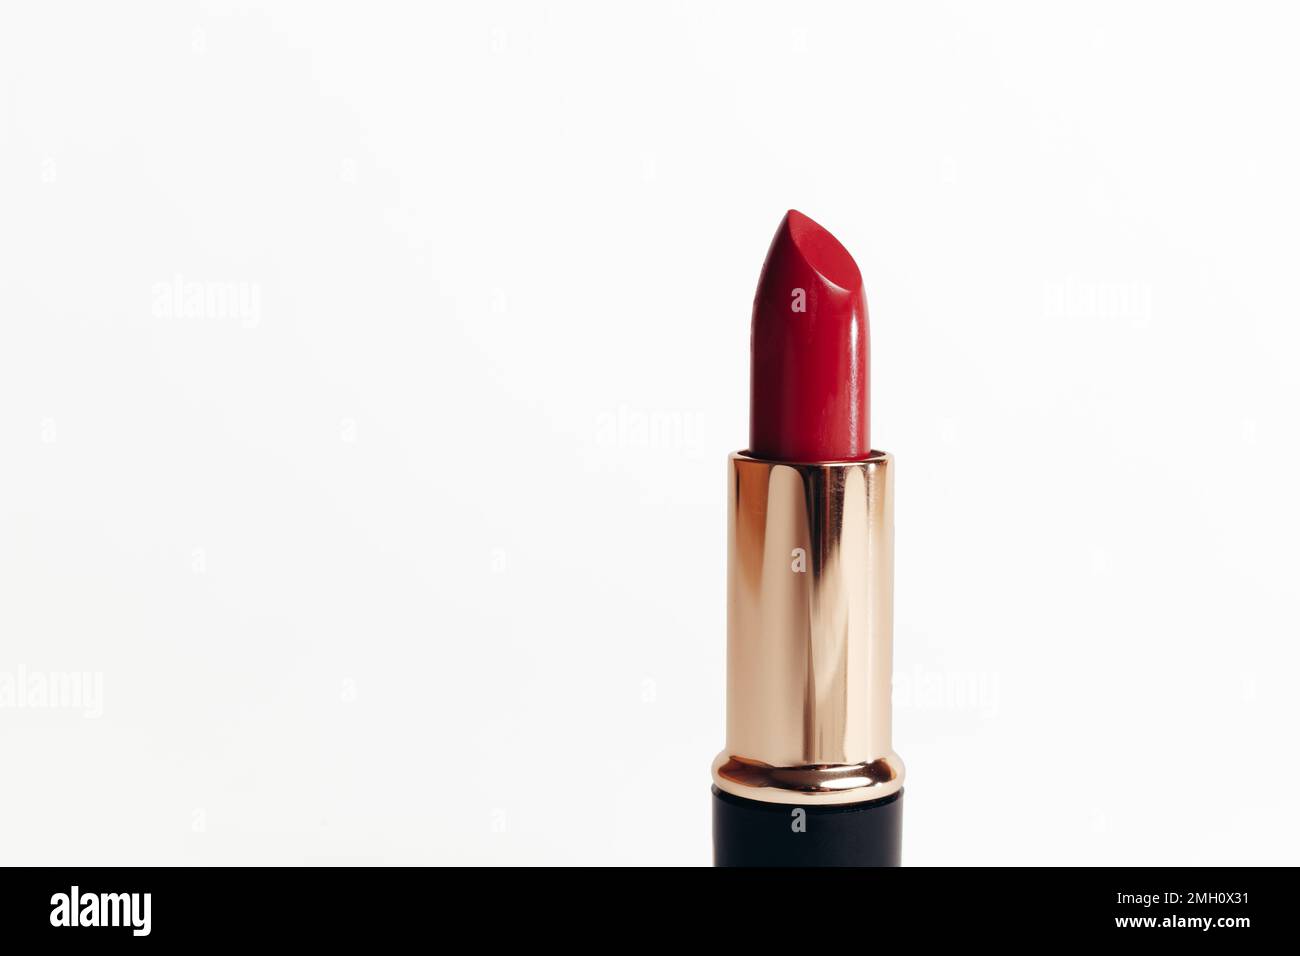 Isolated new red lipstick without cap in a golden container on a white background, macro photo Stock Photo